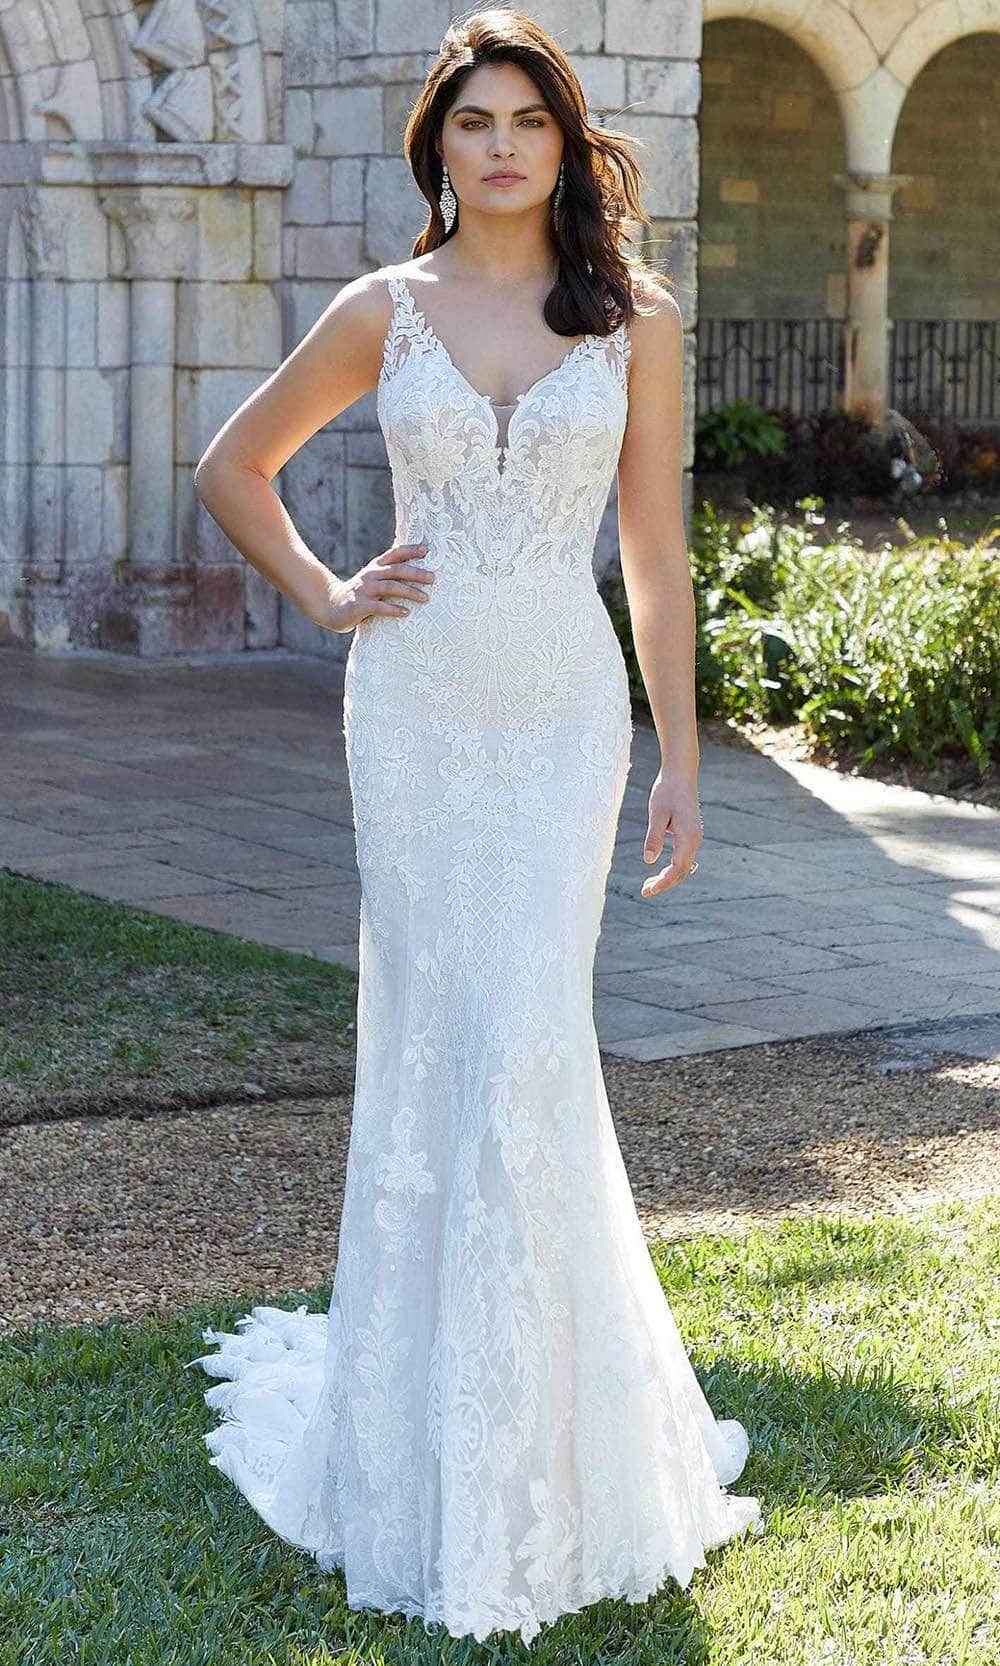 Champagne Wedding Gown w/ Lace Bodice & Plunging Neckline